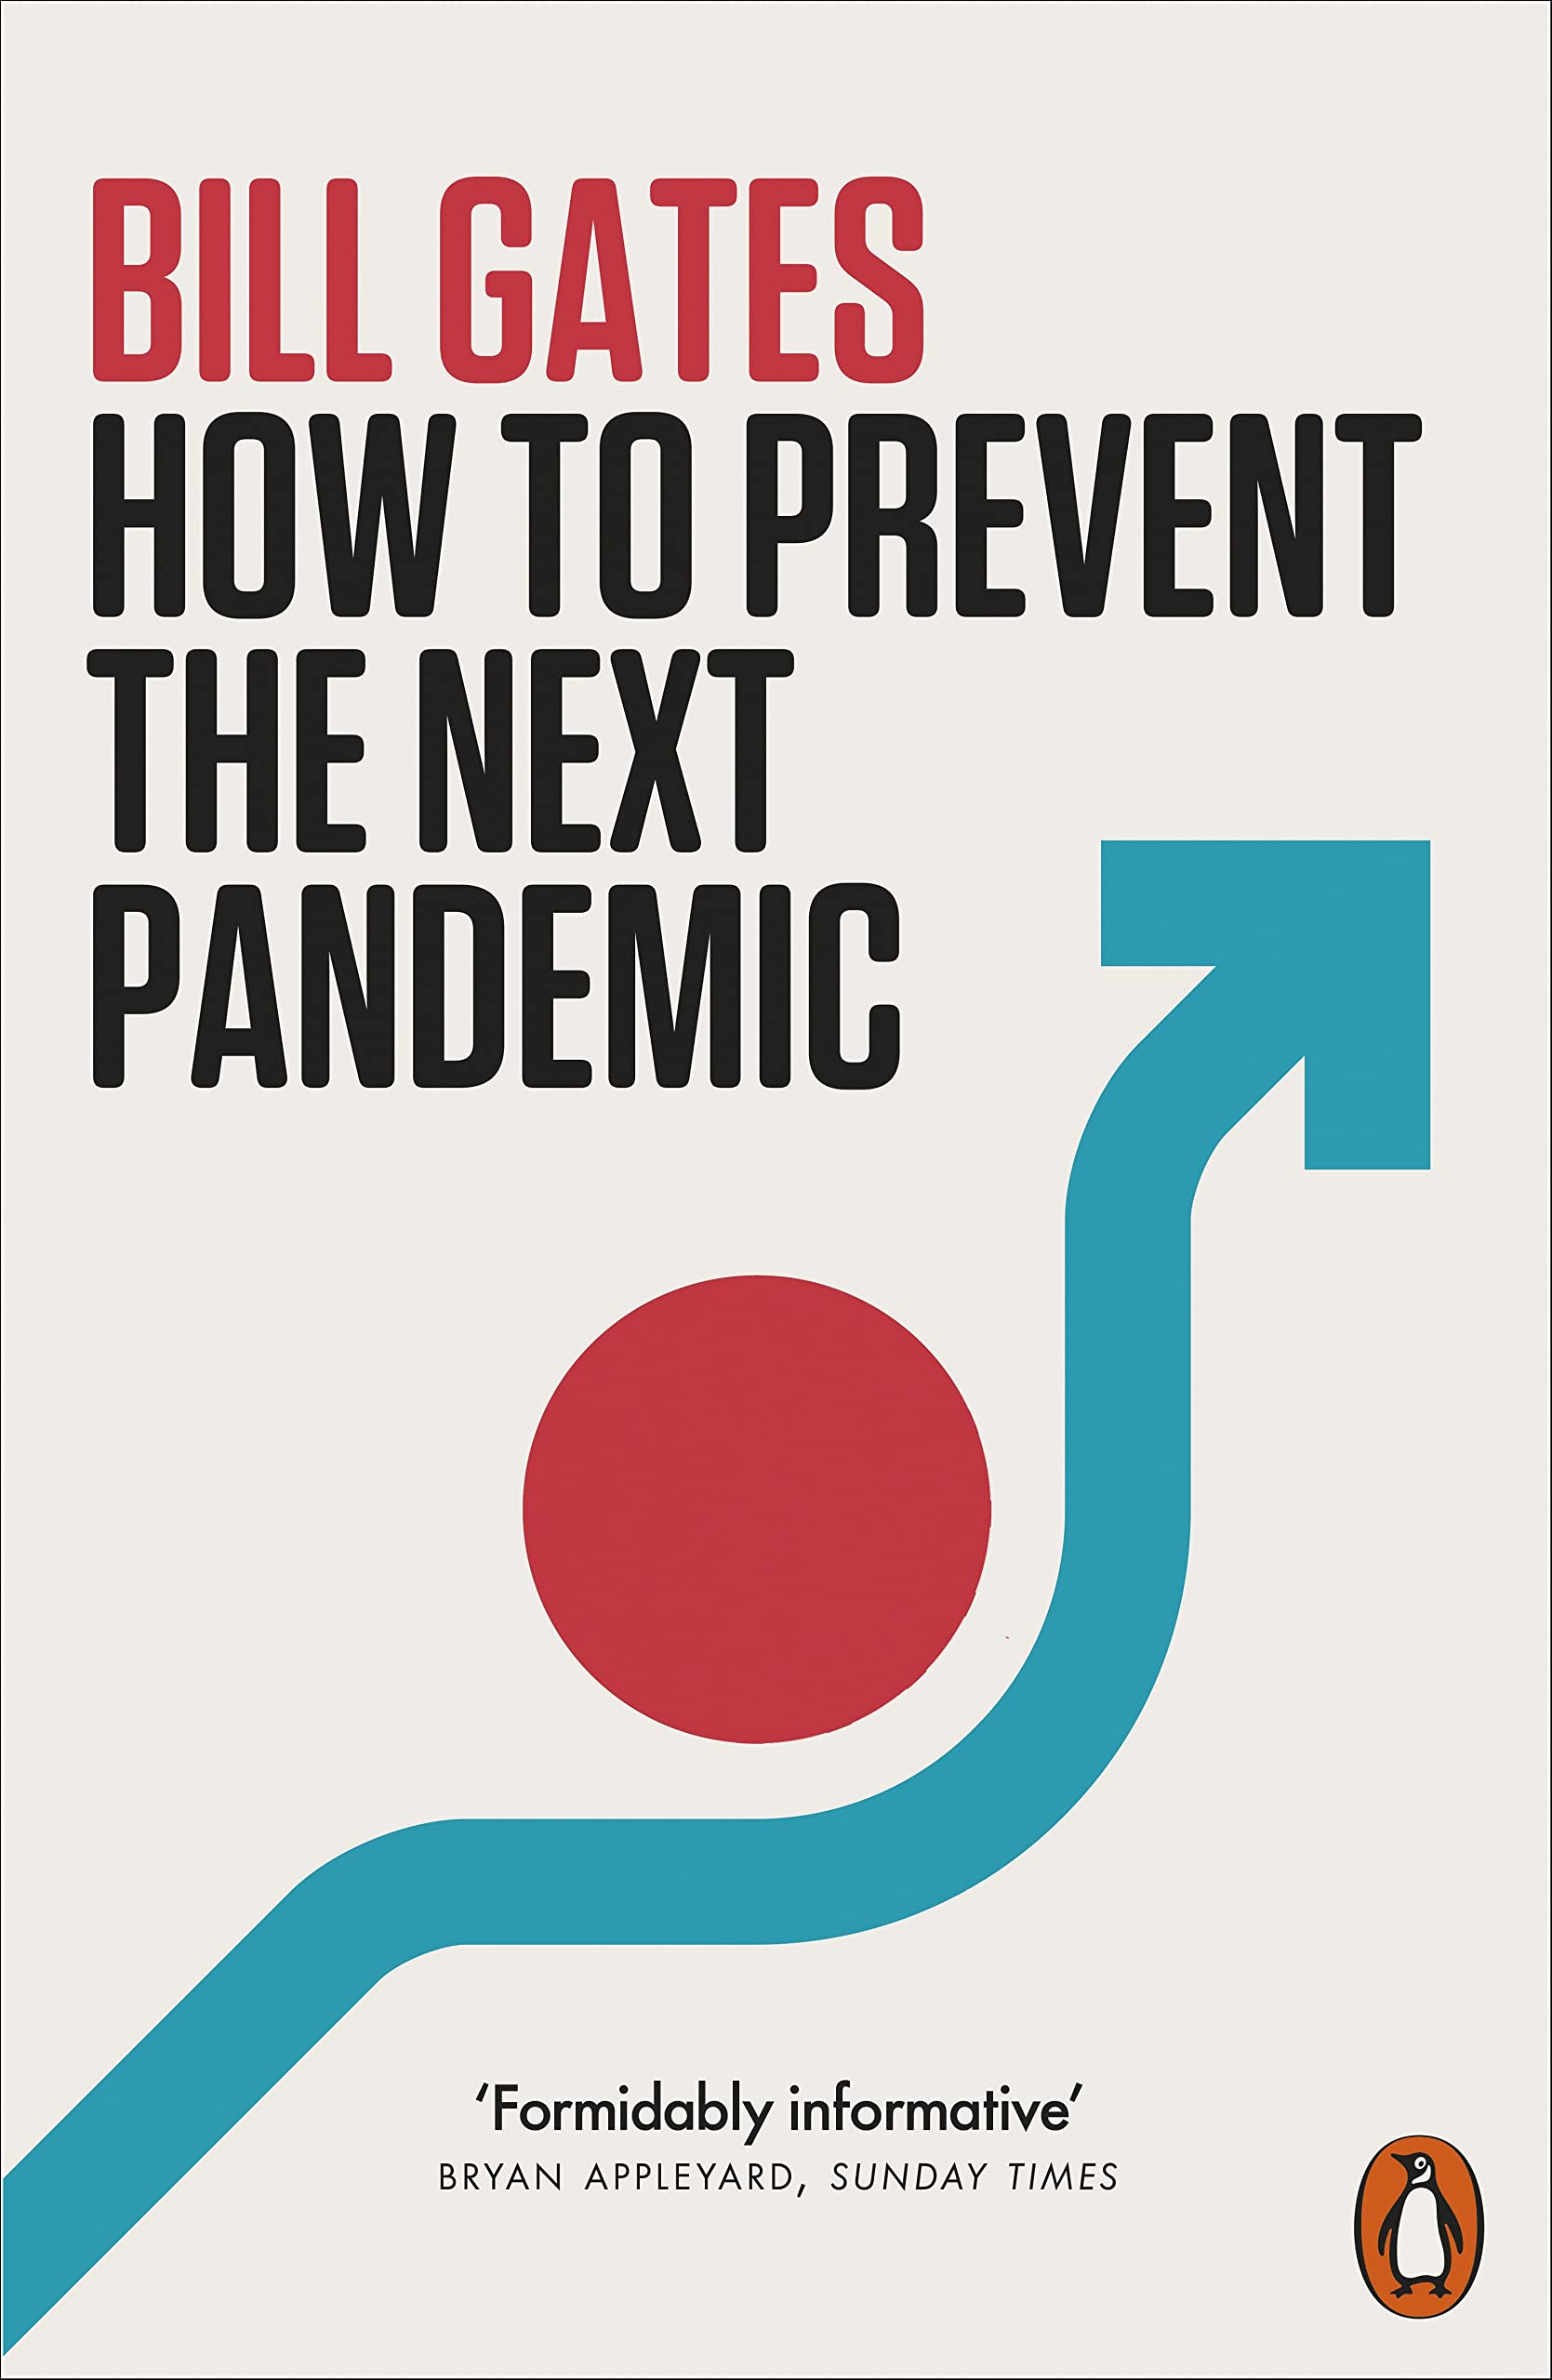 How to Prevent the Next Pandemic | Bill Gates